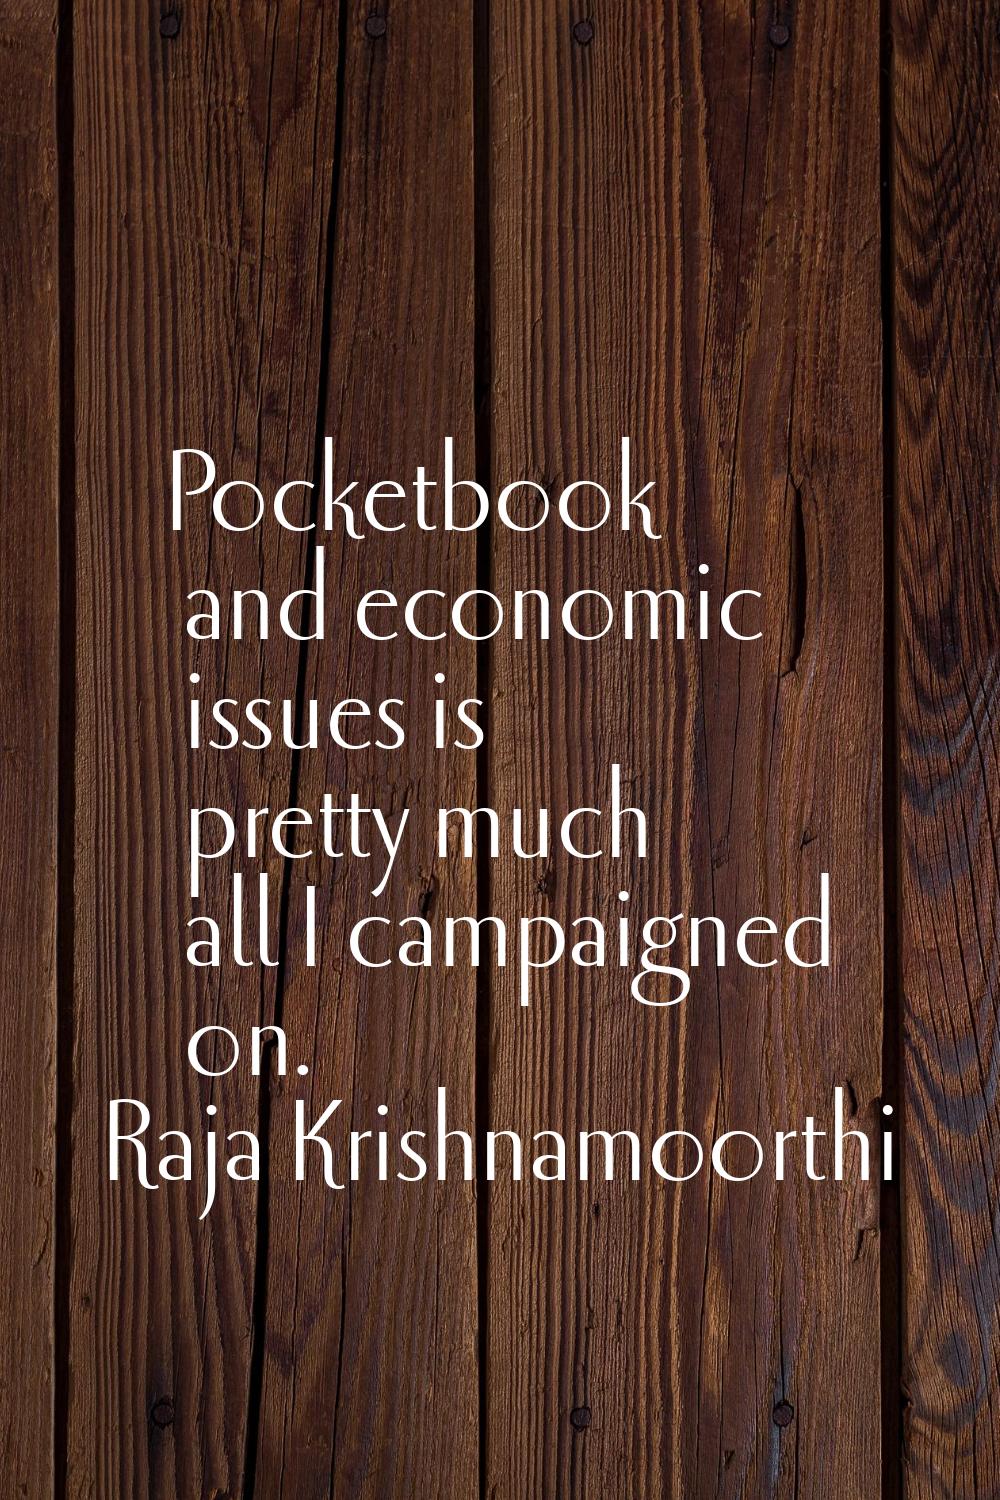 Pocketbook and economic issues is pretty much all I campaigned on.